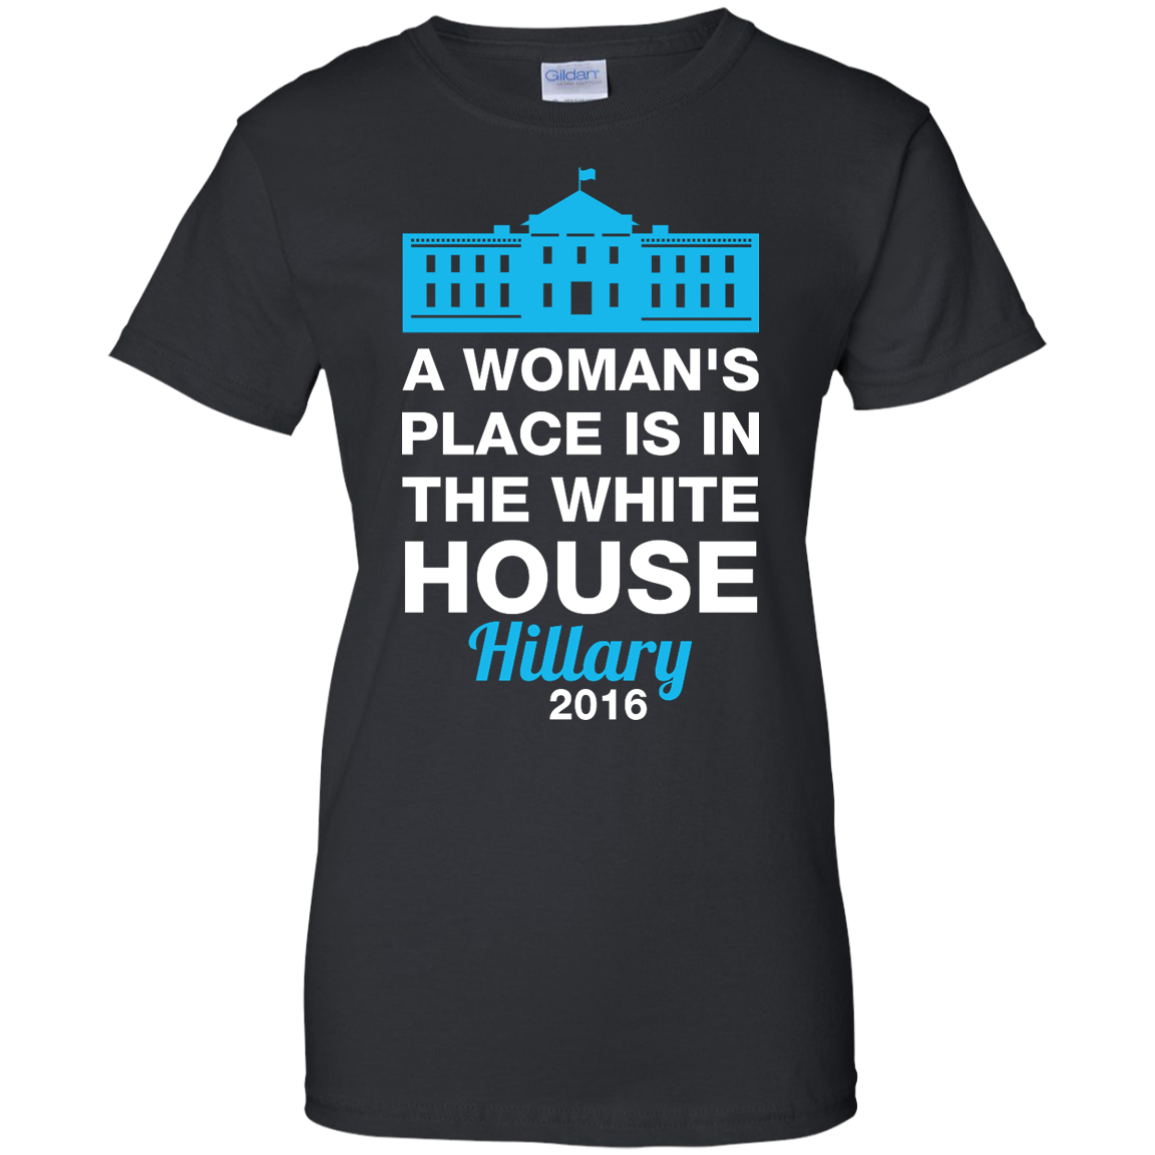 A Woman's Place Is In The White House Shirt, Hoodie, Tank - ifrogtees